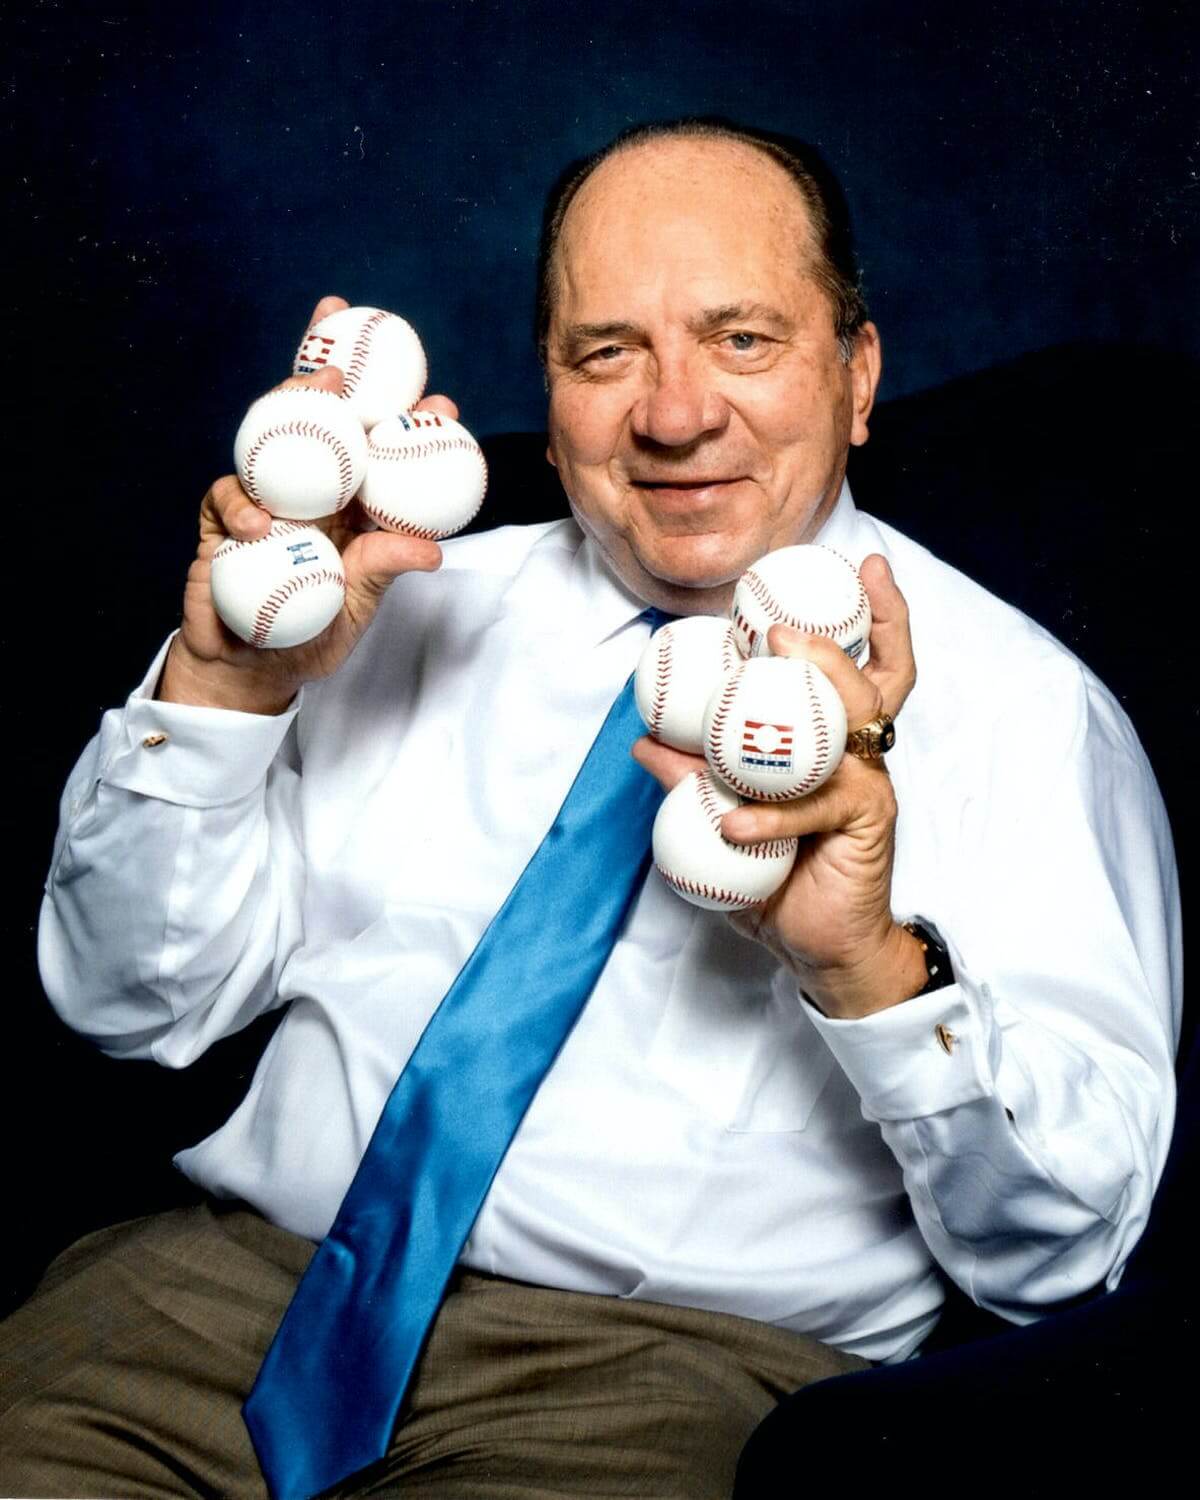 How Many Baseballs Could Johnny Bench Hold In One Hand?